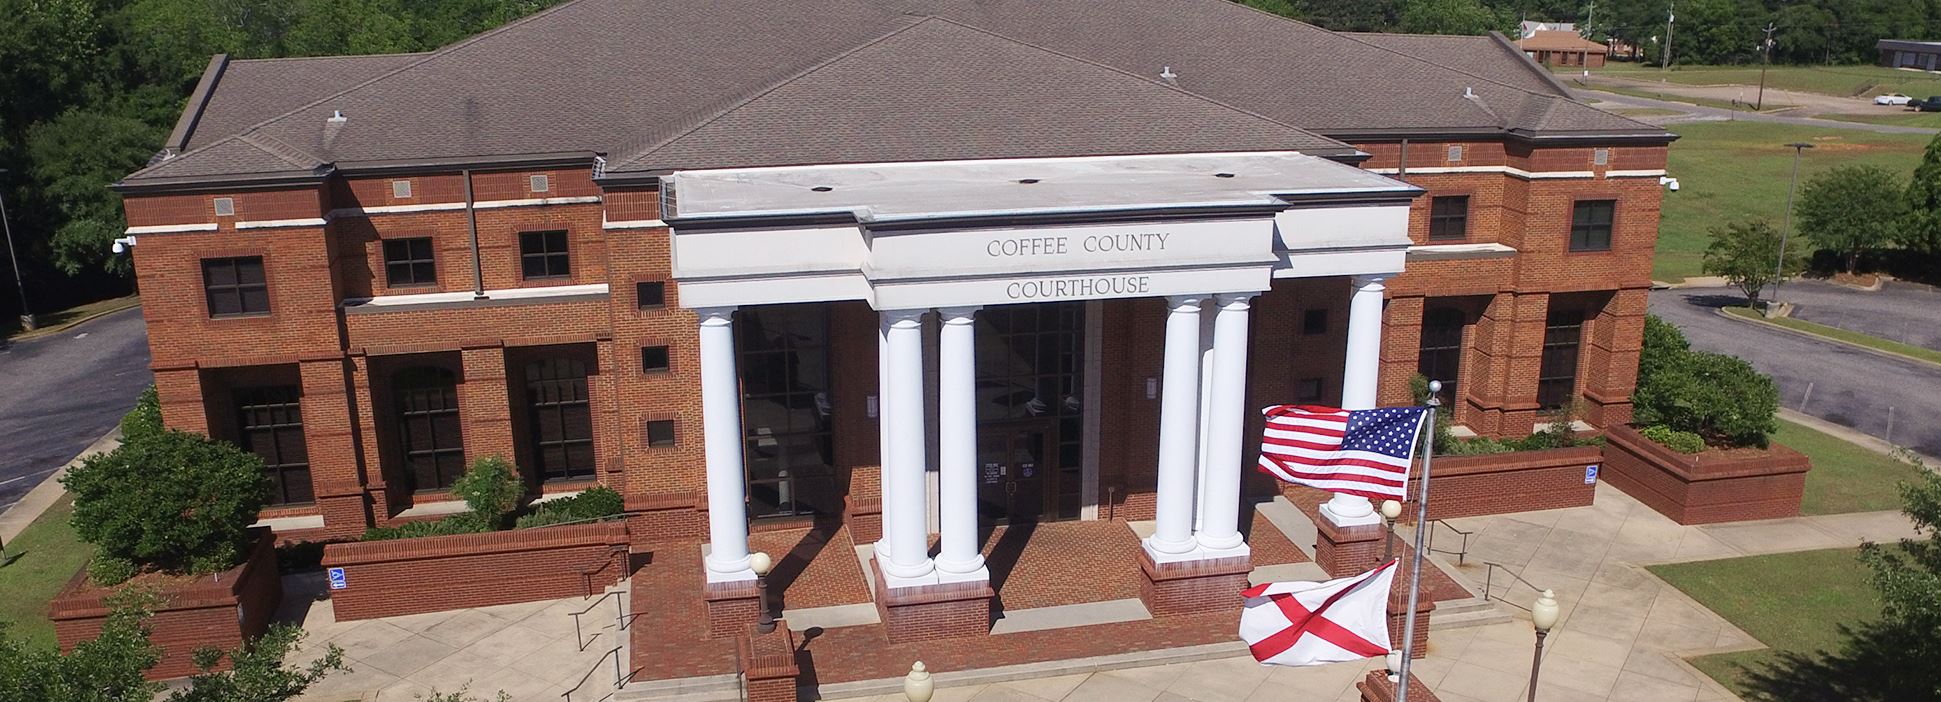 Image of Coffee County Revenue Commissioner, Enterprise Office